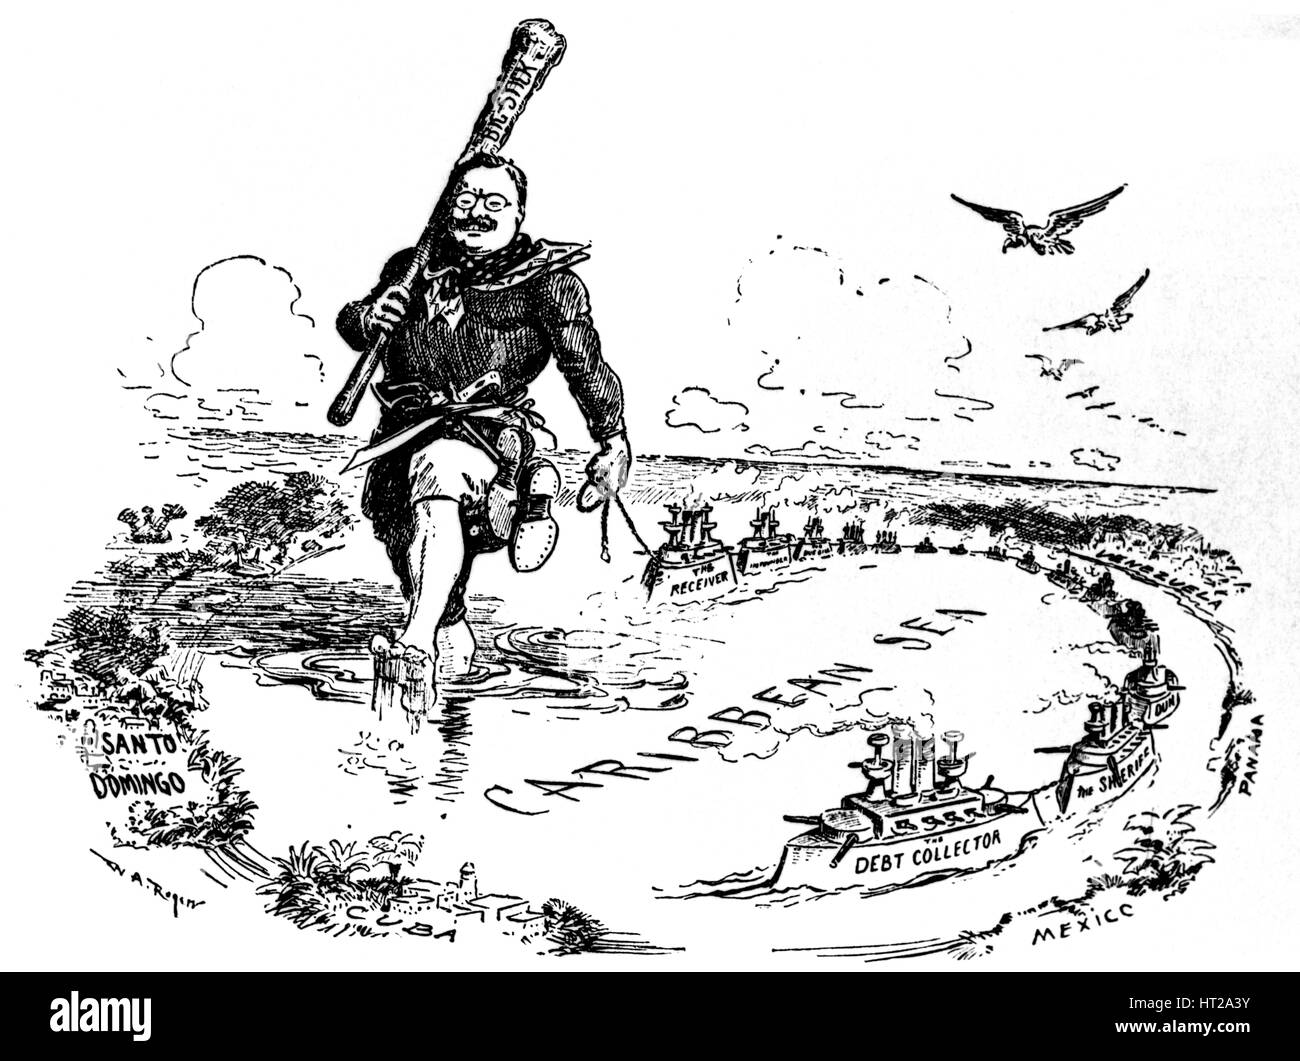 The Big Stick in the Caribbean Sea. Caricature on Theodore Roosevelt, 1904. Artist: Rogers, William Allen (1854-1931) Stock Photo